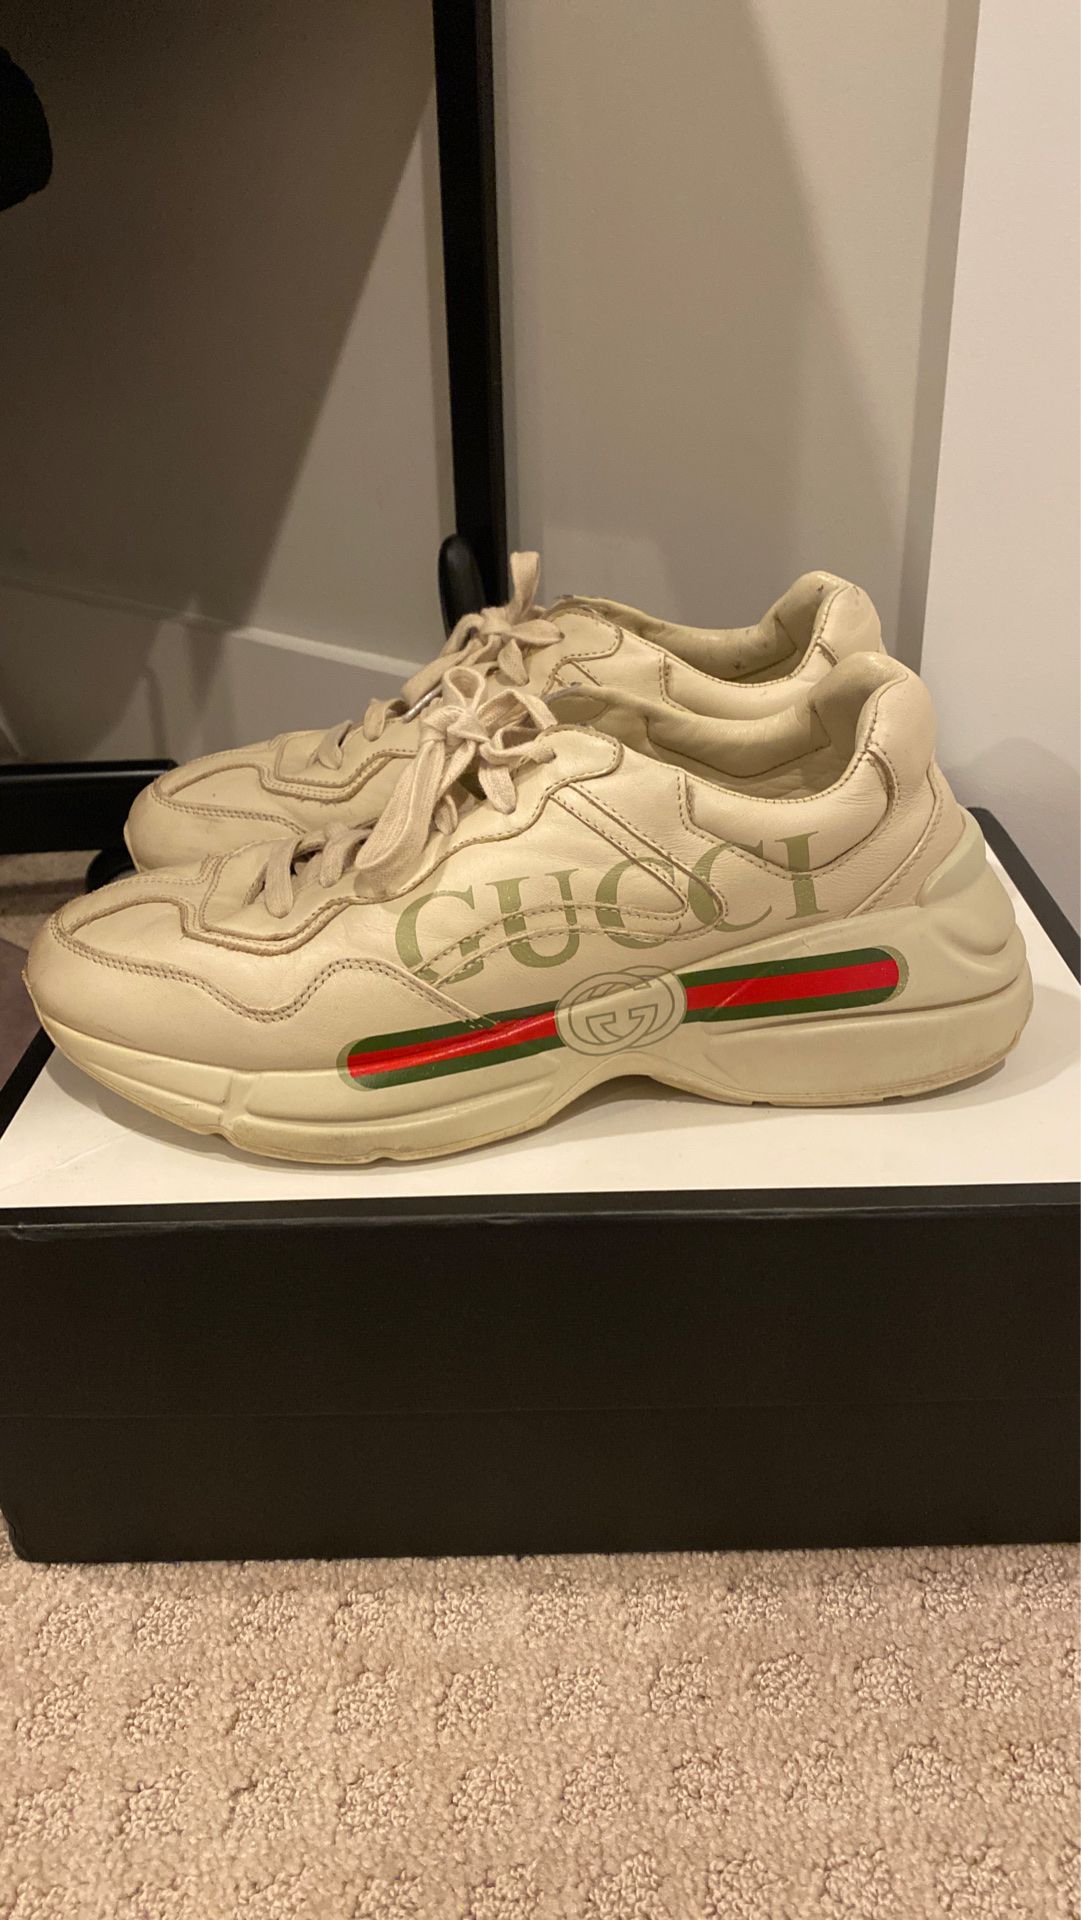 Gucci python sneakers